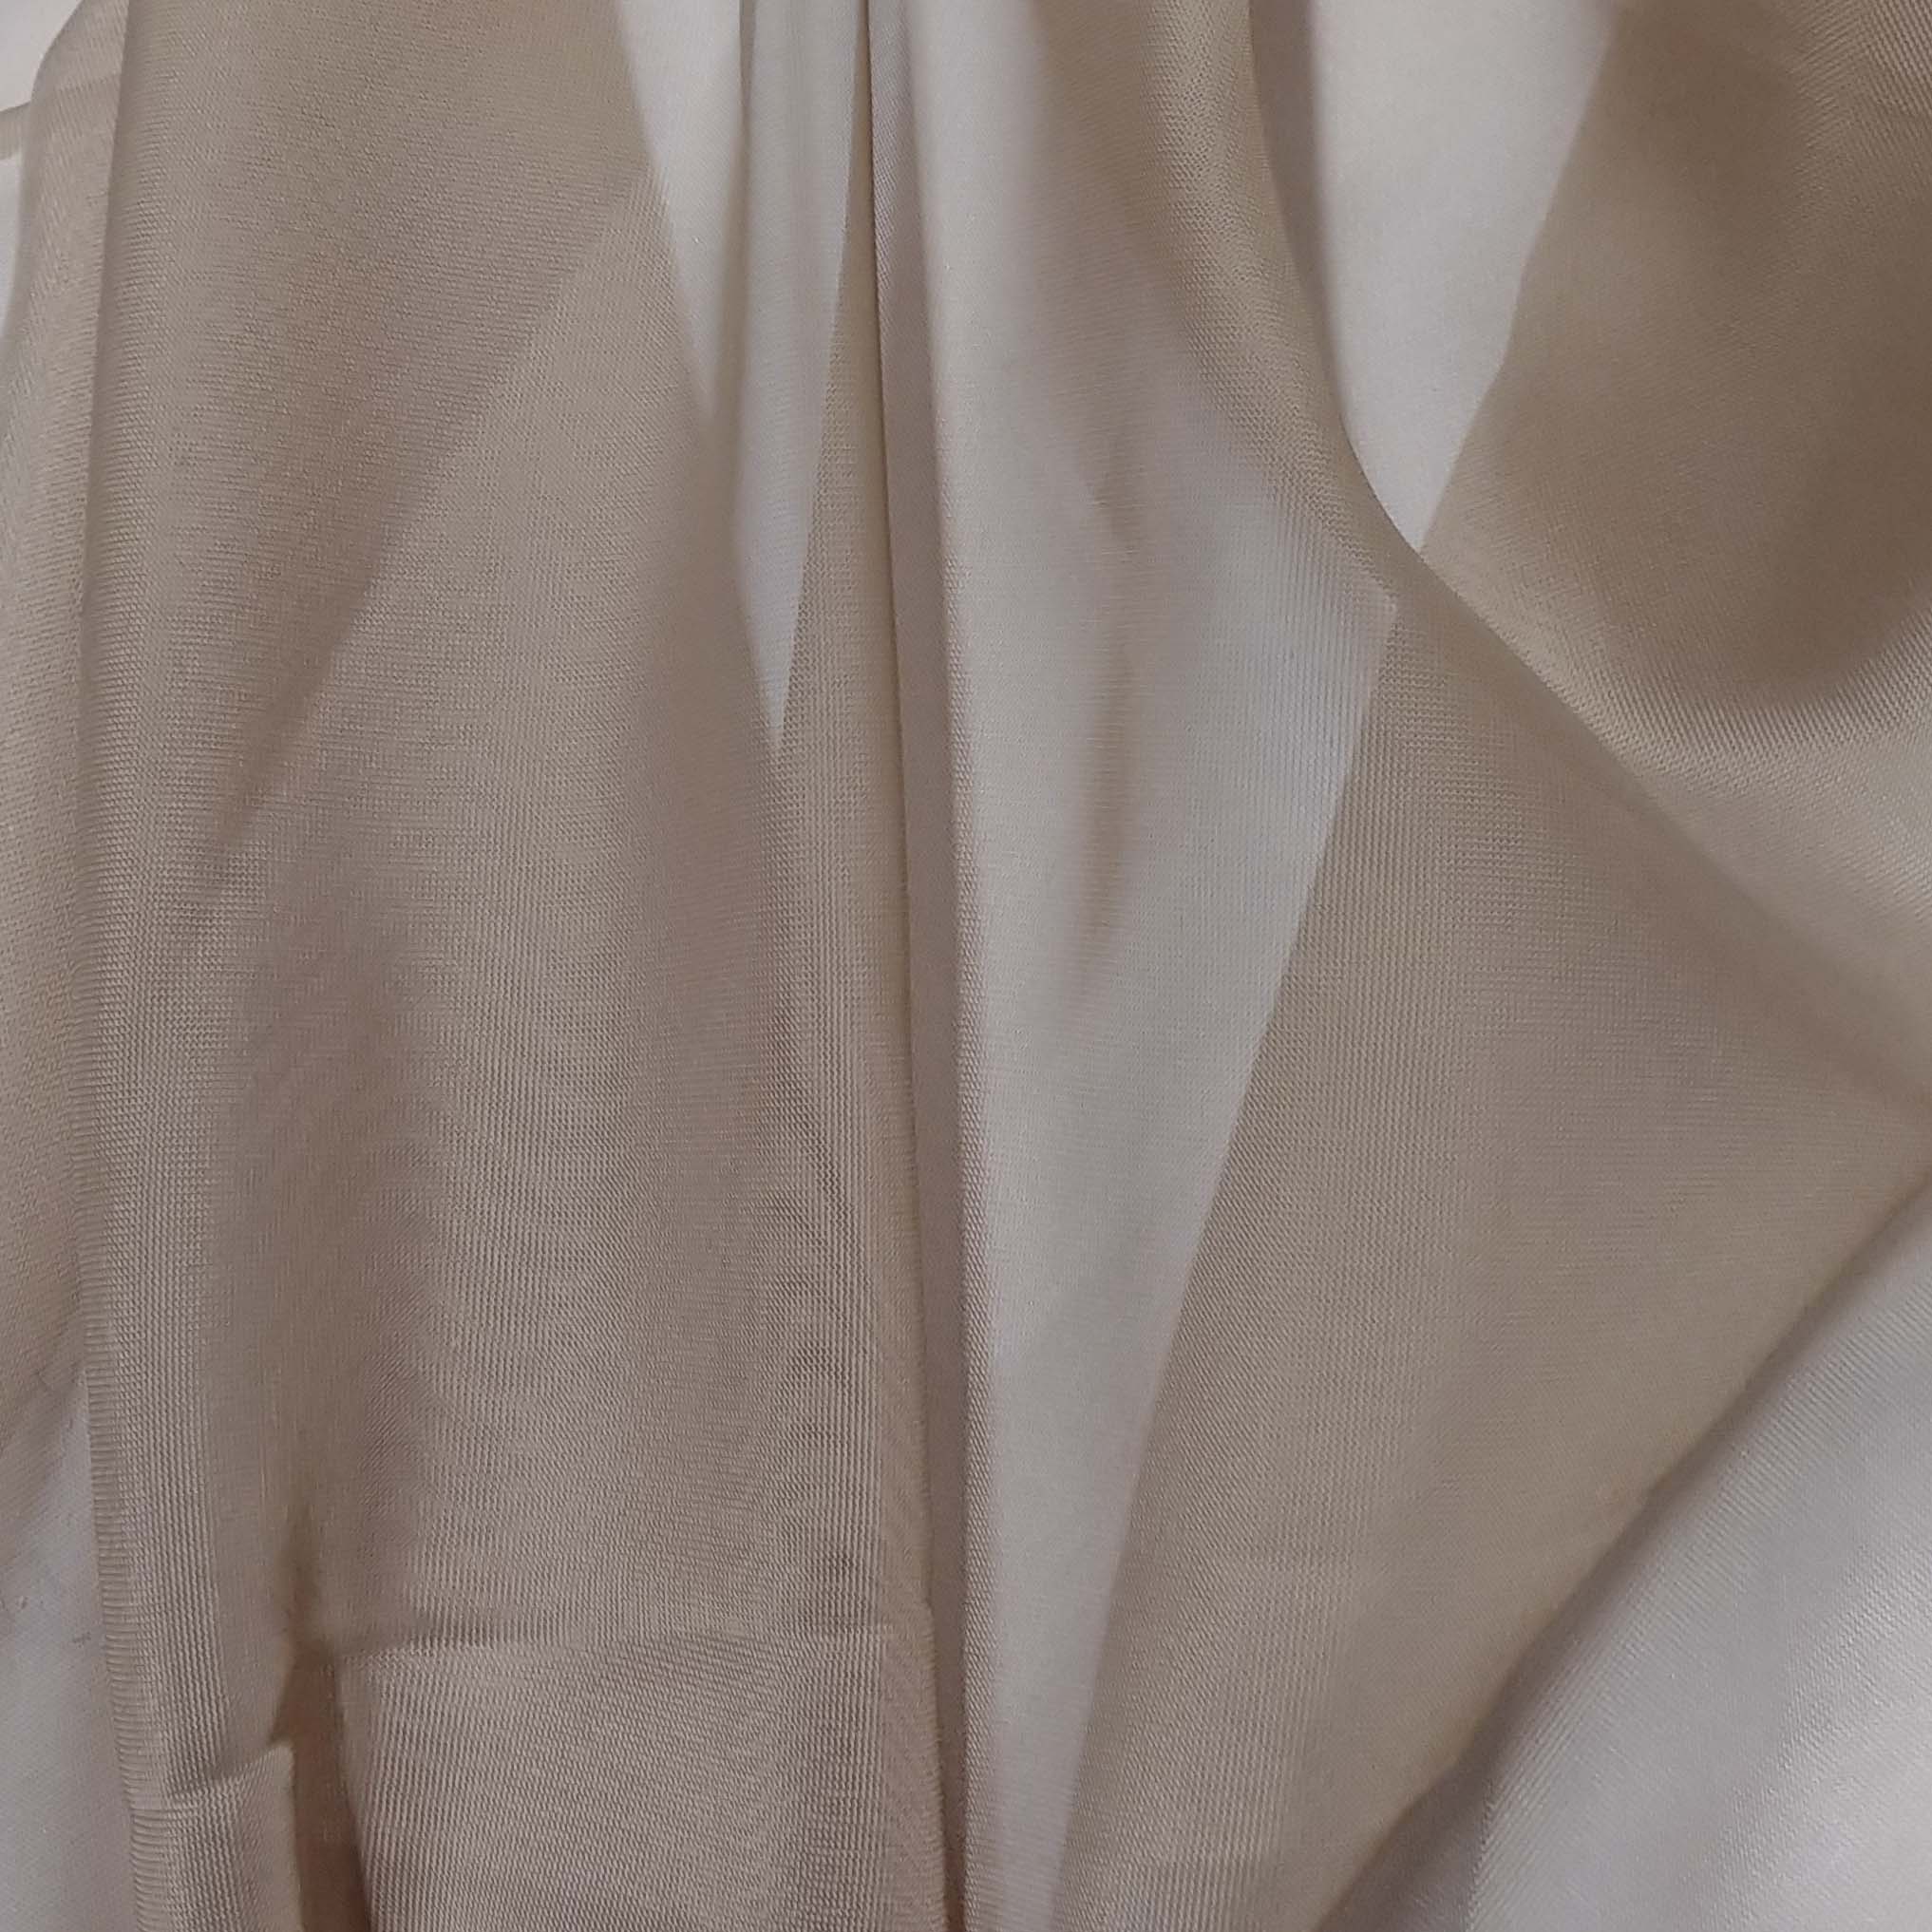 Dirty White Color Linen Cloth